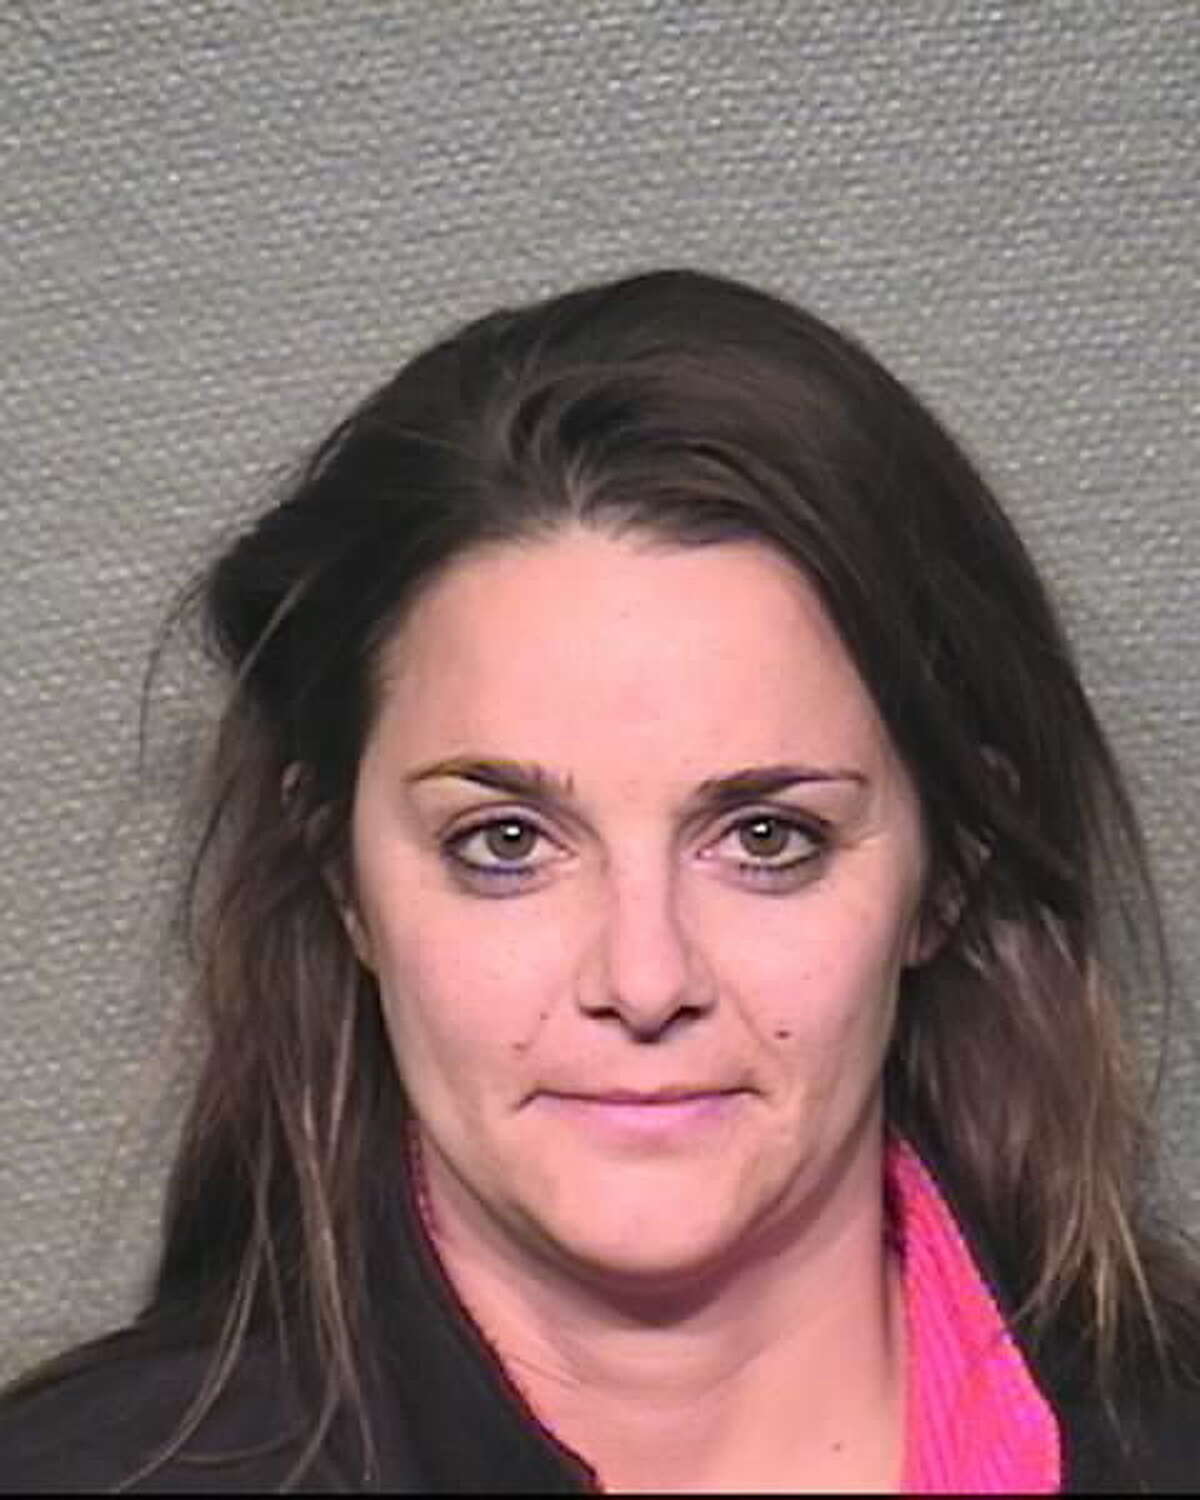 Kristen Lindsey, a Brenham veterinarian who fatally shot a cat with a bow and arrow in April 2015, was arrested March 21, 2016, in Harris County on a misdemeanor charge of driving while intoxicated. While the DWI case is pending in Harris County Court No. 6, a state agency is in the process of deciding on possible discipline in response to the cat-killing. (Houston Police Department)